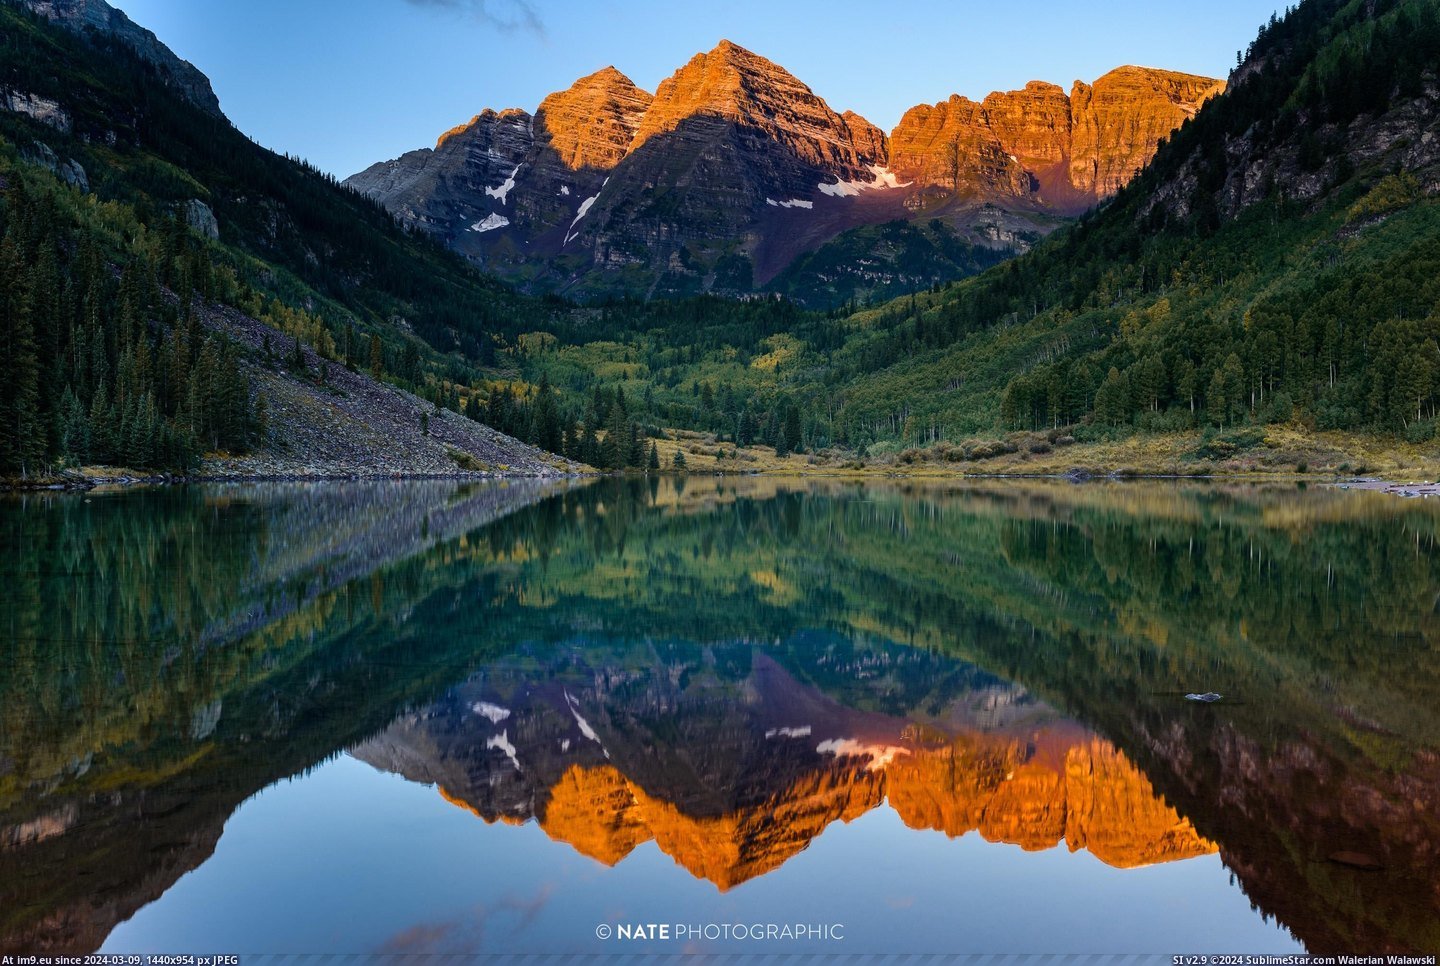 #Shots #Sunrise #Card #Maroon #Memory #Hiked #Battery #Died #Bells #Stranger [Earthporn] Hiked to Maroon Bells, CO for sunrise. Battery died. A stranger let me take a few shots with my memory card in his c Pic. (Bild von album My r/EARTHPORN favs))